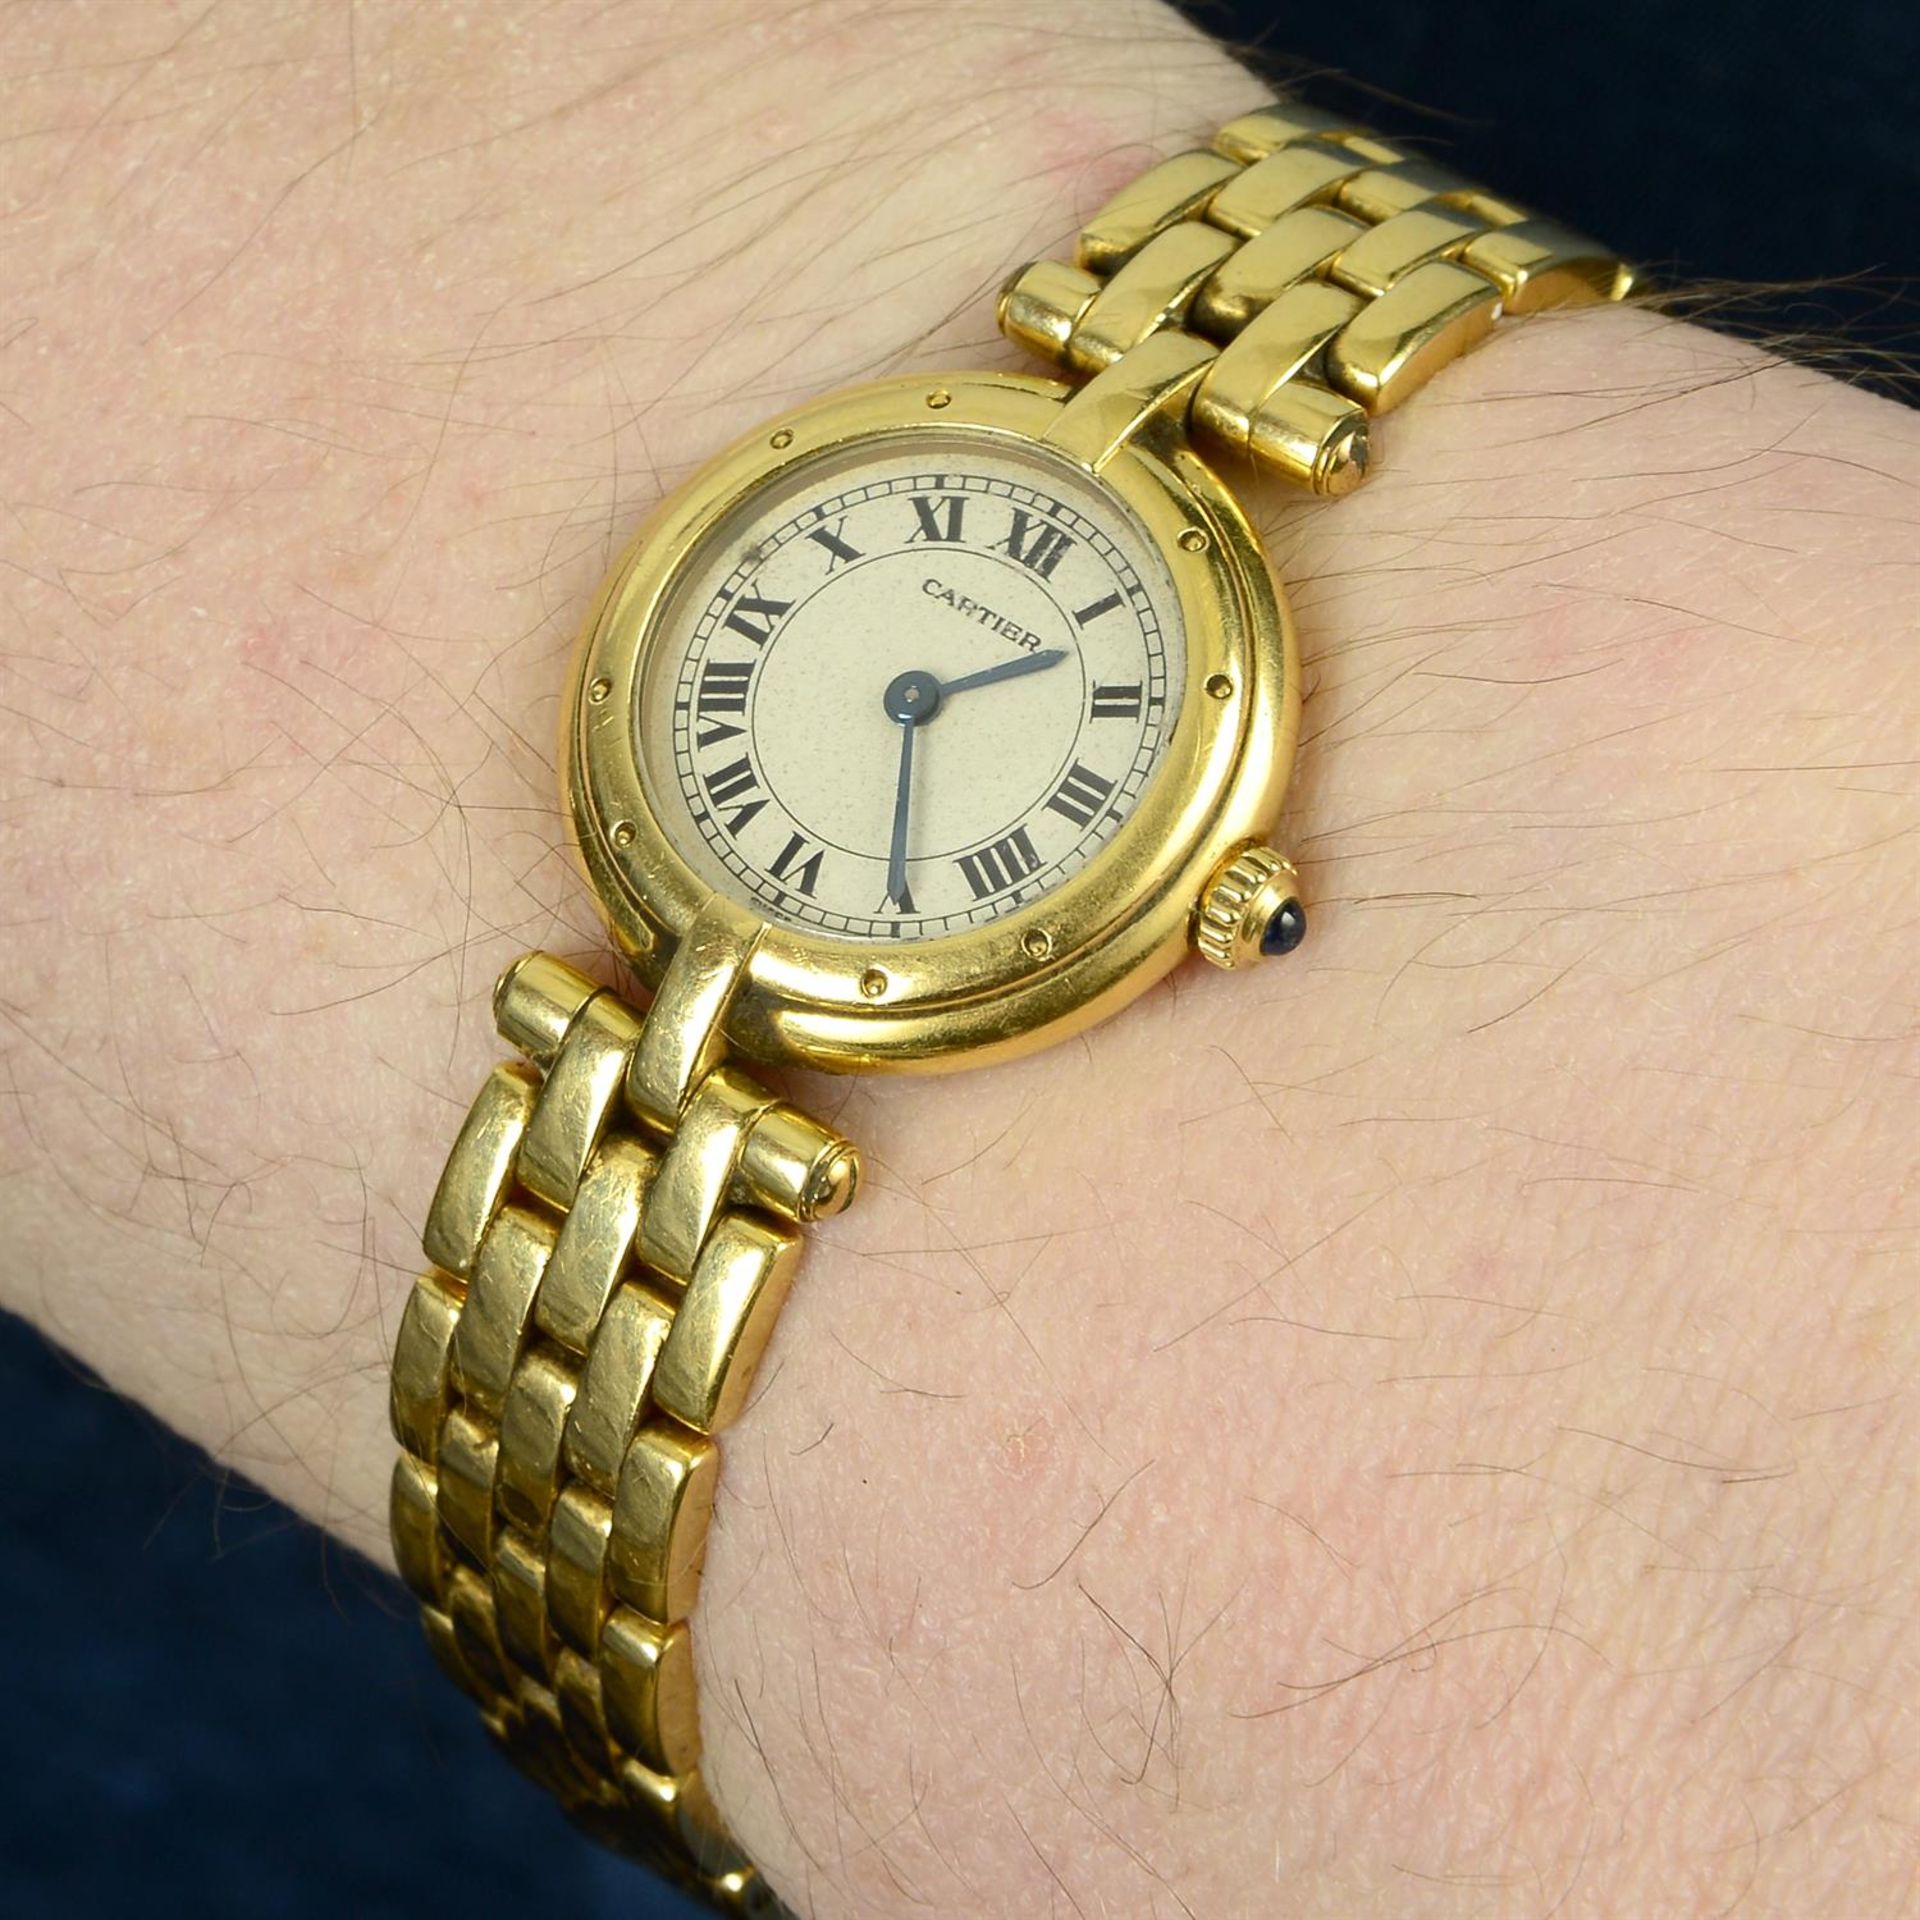 CARTIER - an 18ct yellow gold Panthere Vendome bracelet watch. - Image 6 of 6